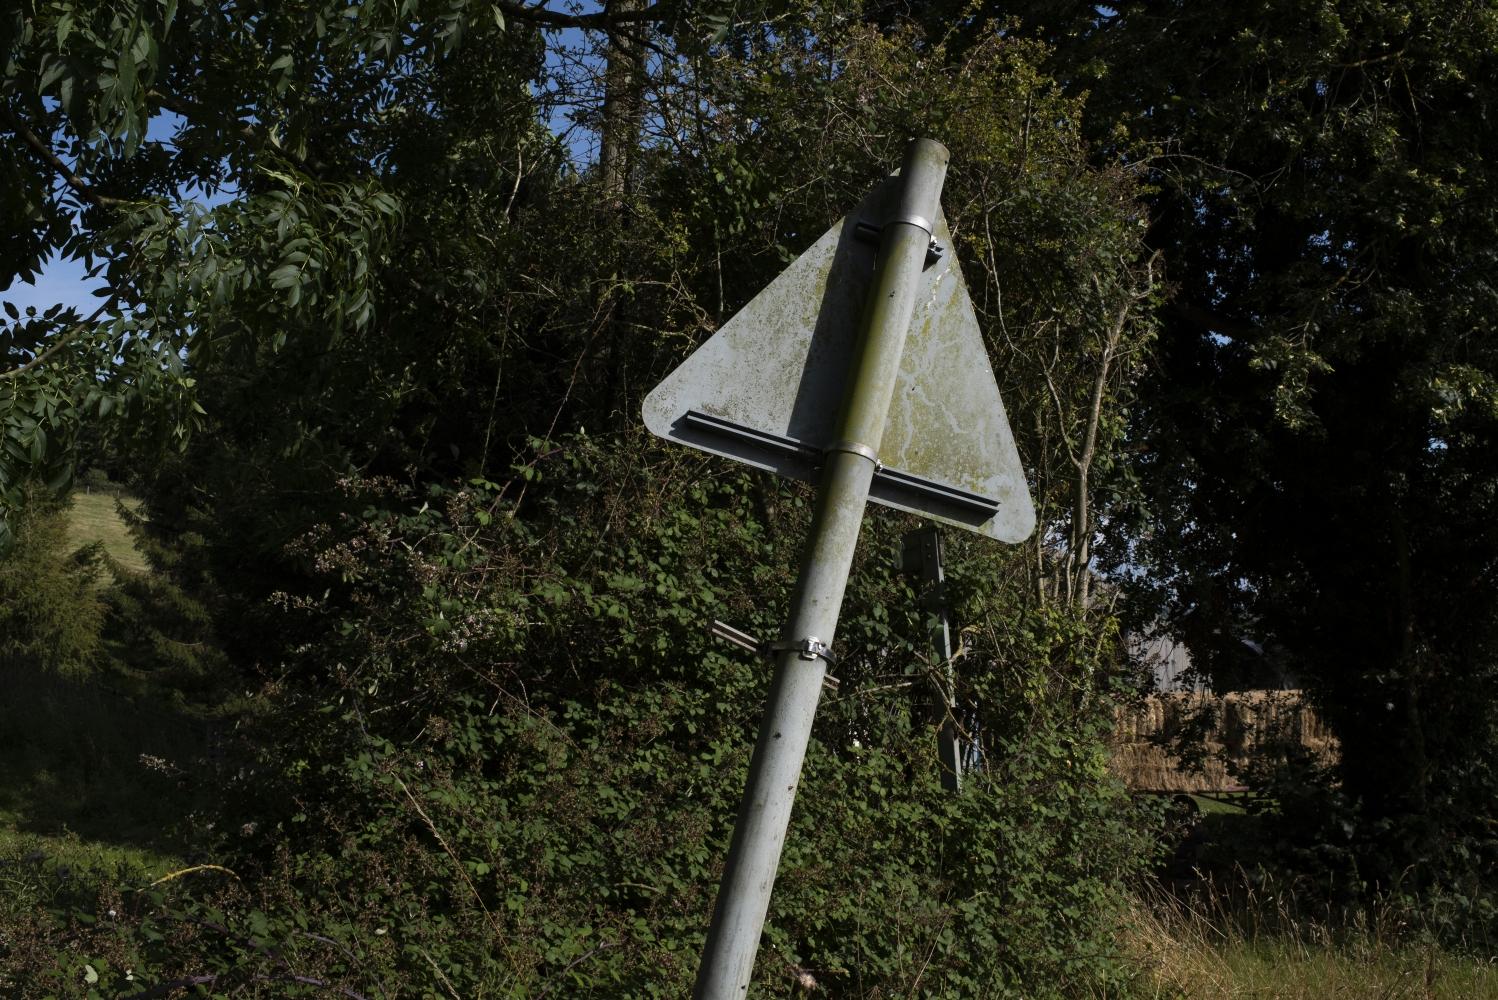 The back of a traffic sign on a country road